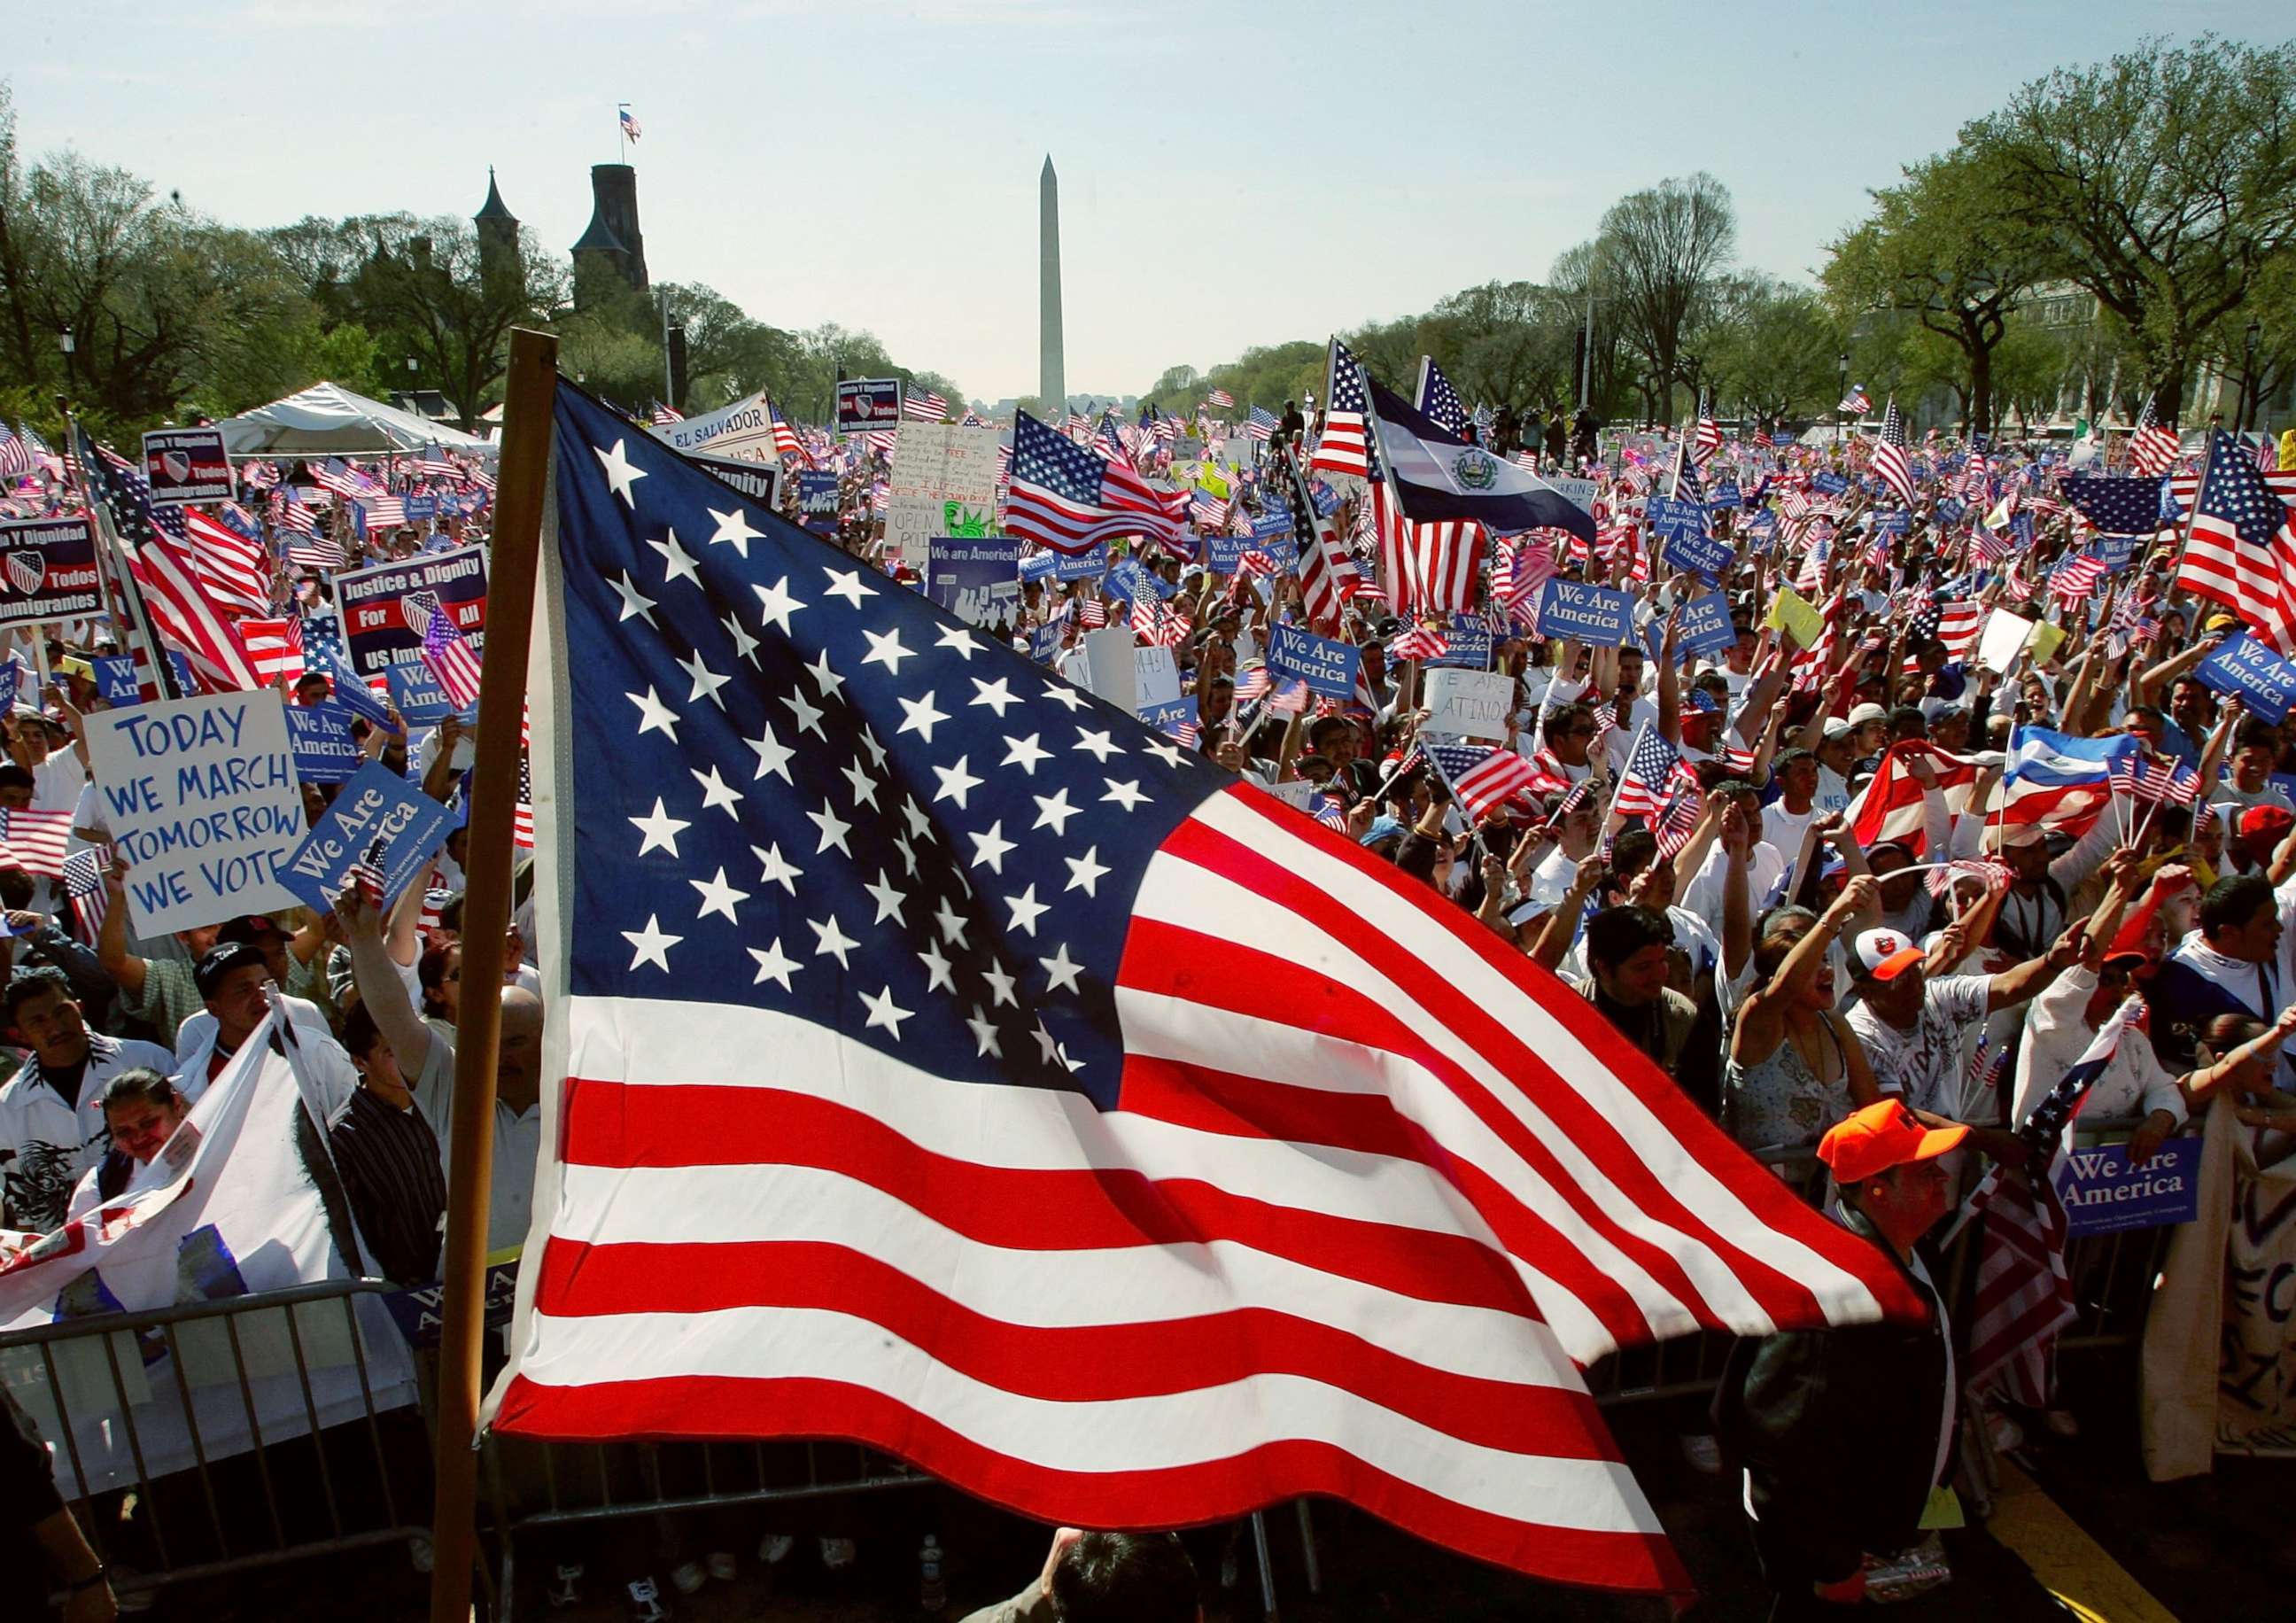 PHOTO: A U.S. flag flies as demonstrators rally during the National Day of Action for Immigrant Justice, or La Marcha, on the National Mall April 10, 2006 in Washington, DC.